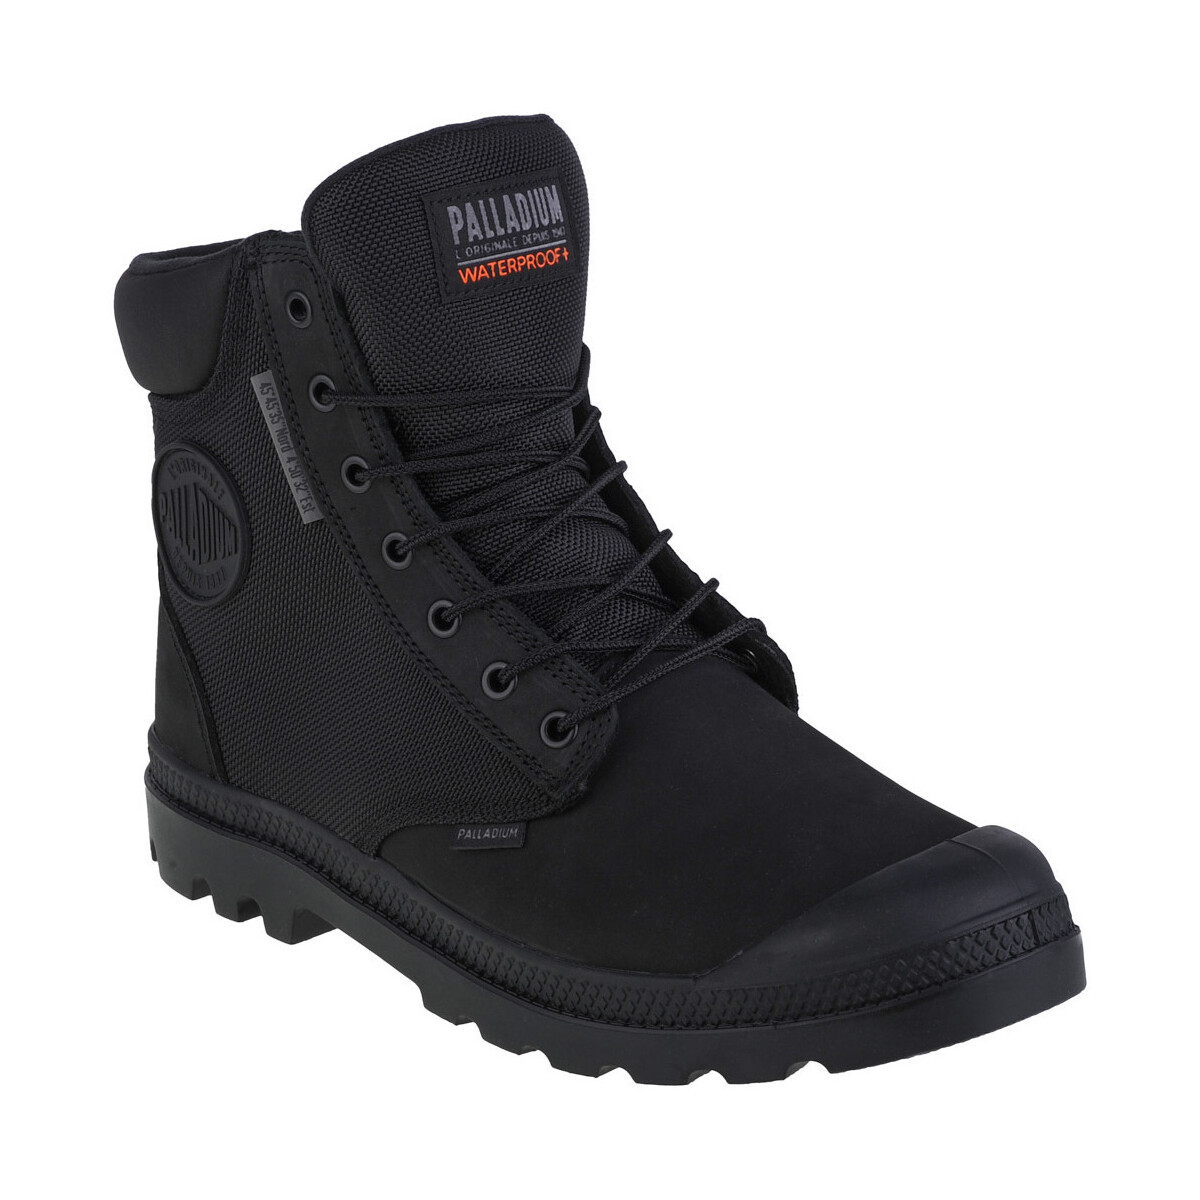 Chaussures The North Face Pampa Sc Wpn U-s Noir